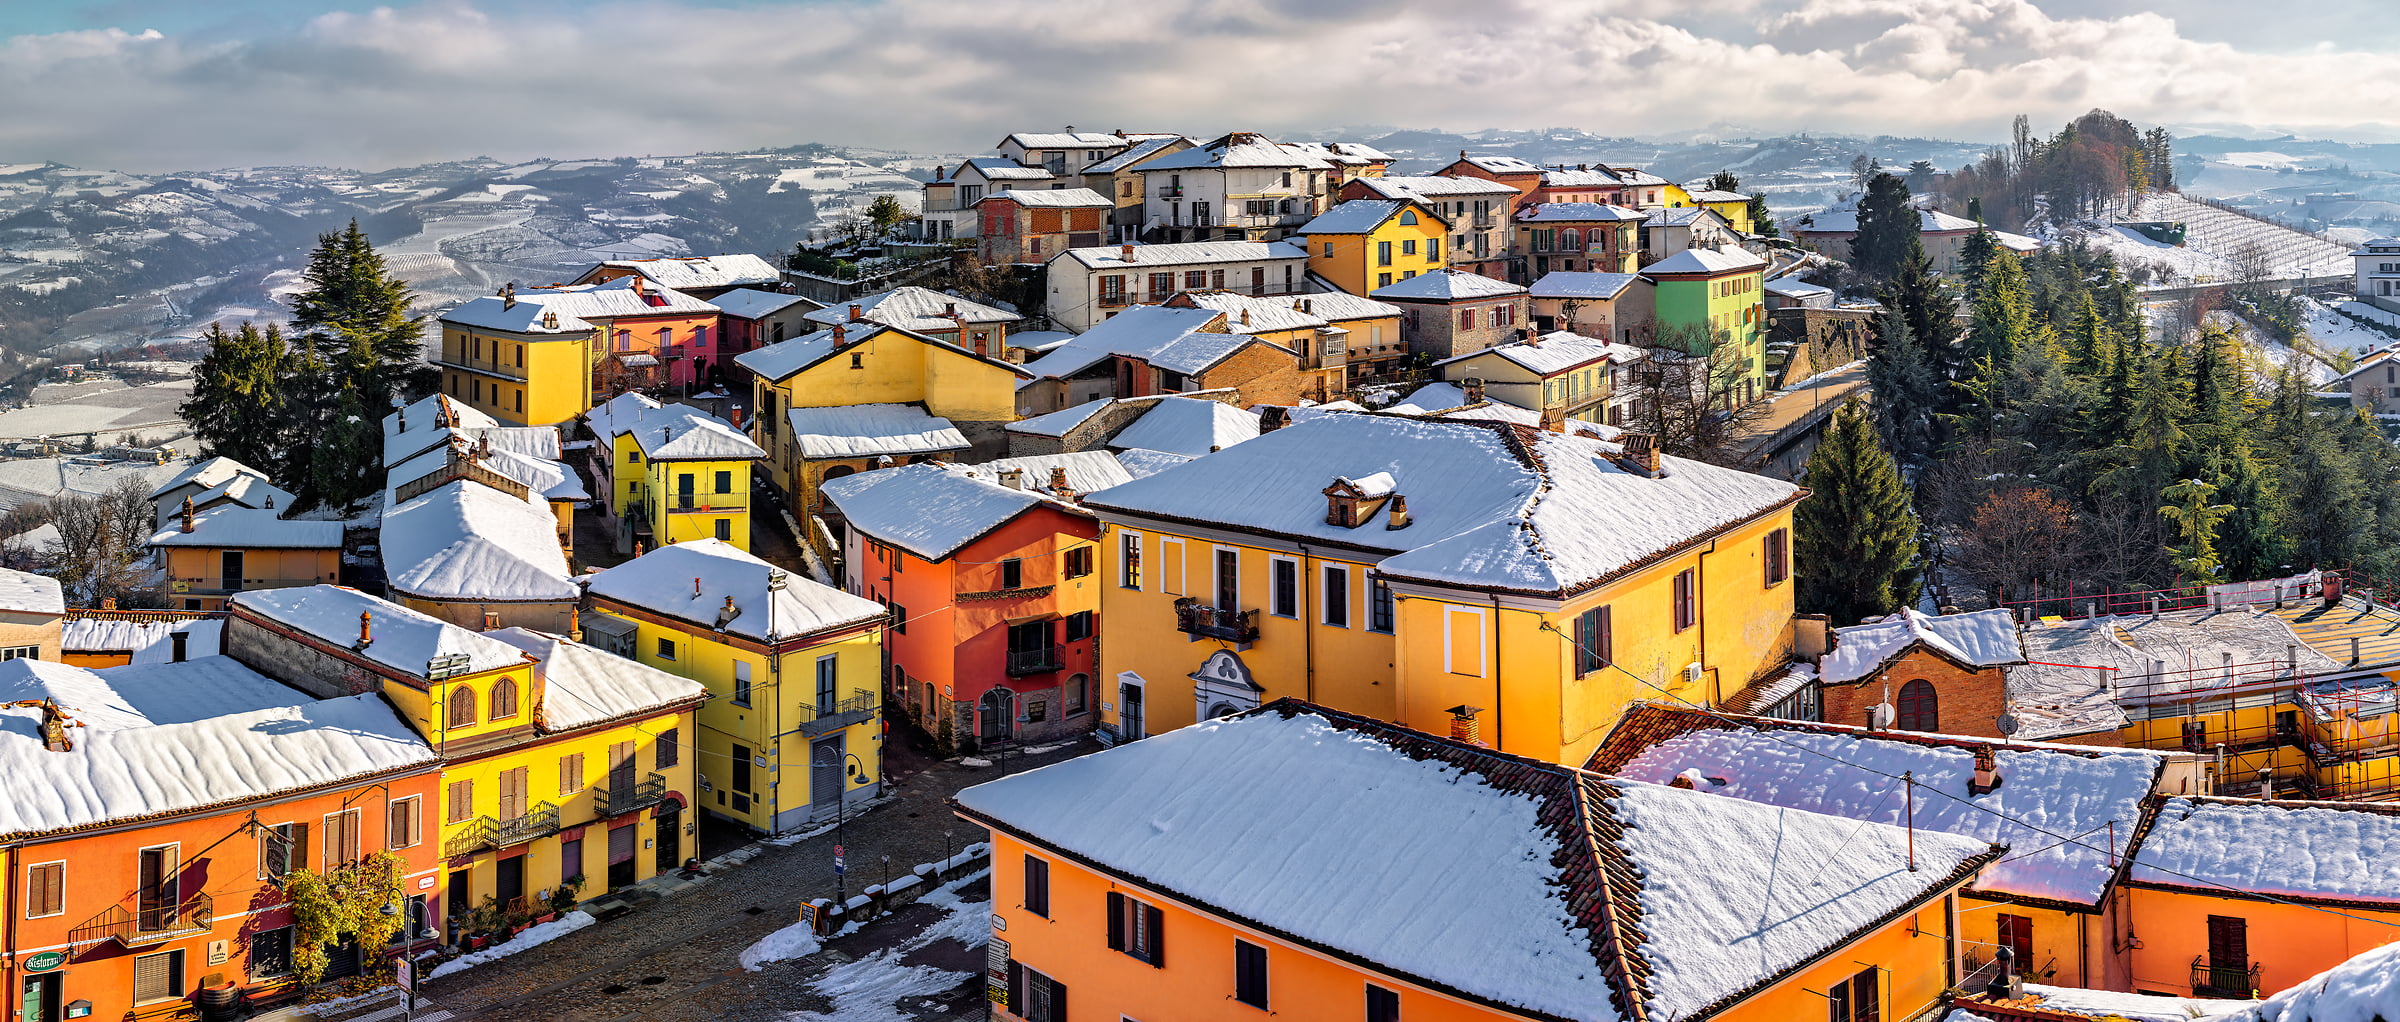 504 megapixels! A very high resolution, large-format VAST photo print of colorful houses in Italy in the snow; landscape photograph created by Duilio Fiorille in Diano D'Alba, Cuneo, Piedmont, Italy.